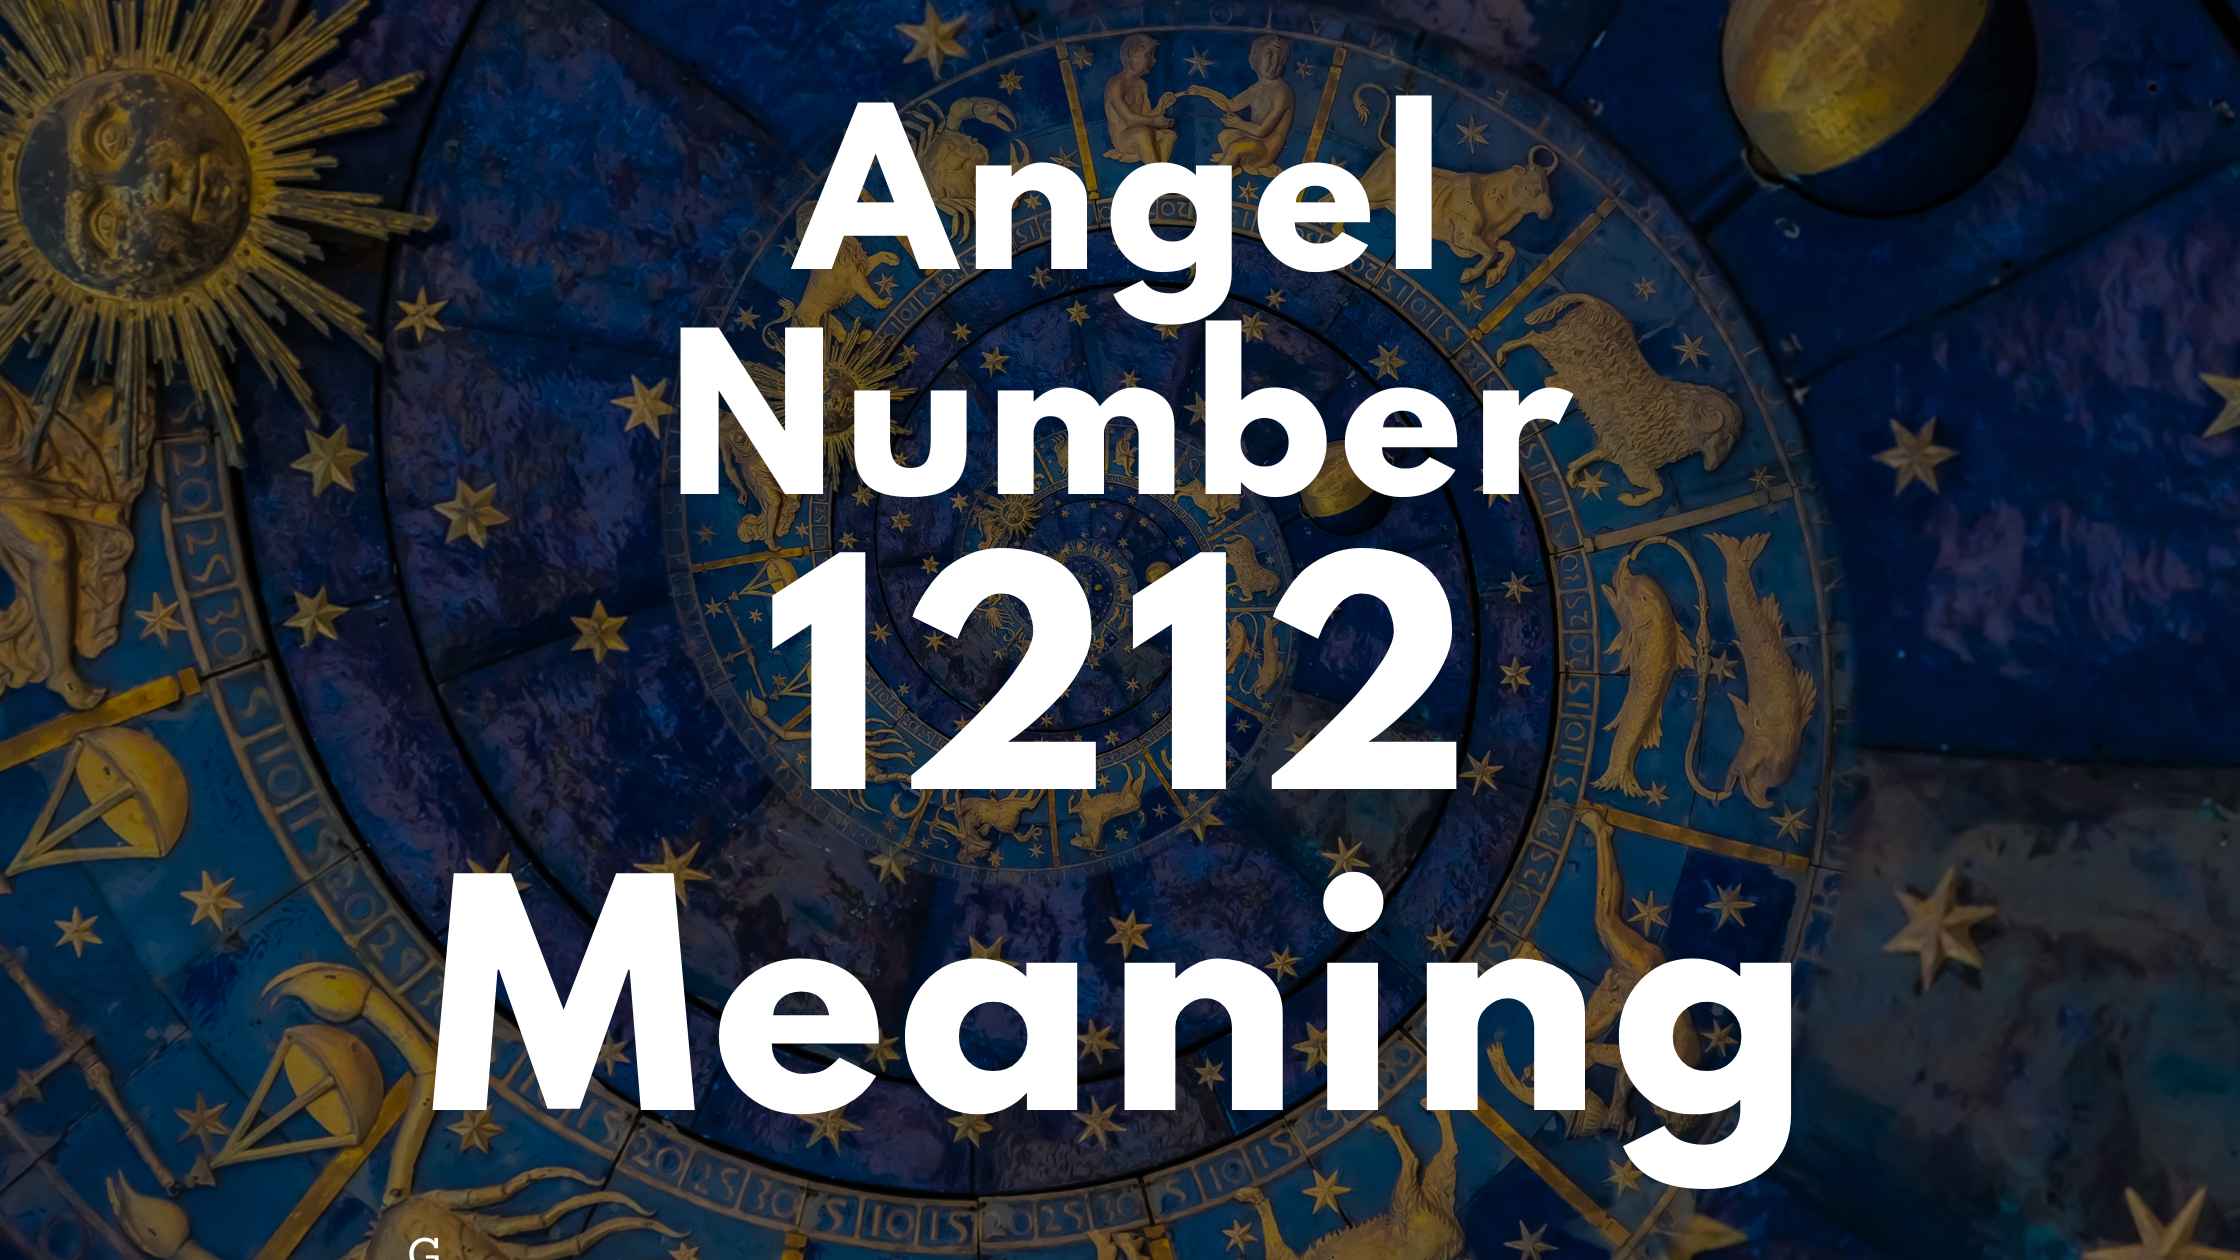 Angel Number 1212 Spiritual Meaning, Symbolism, and Significance